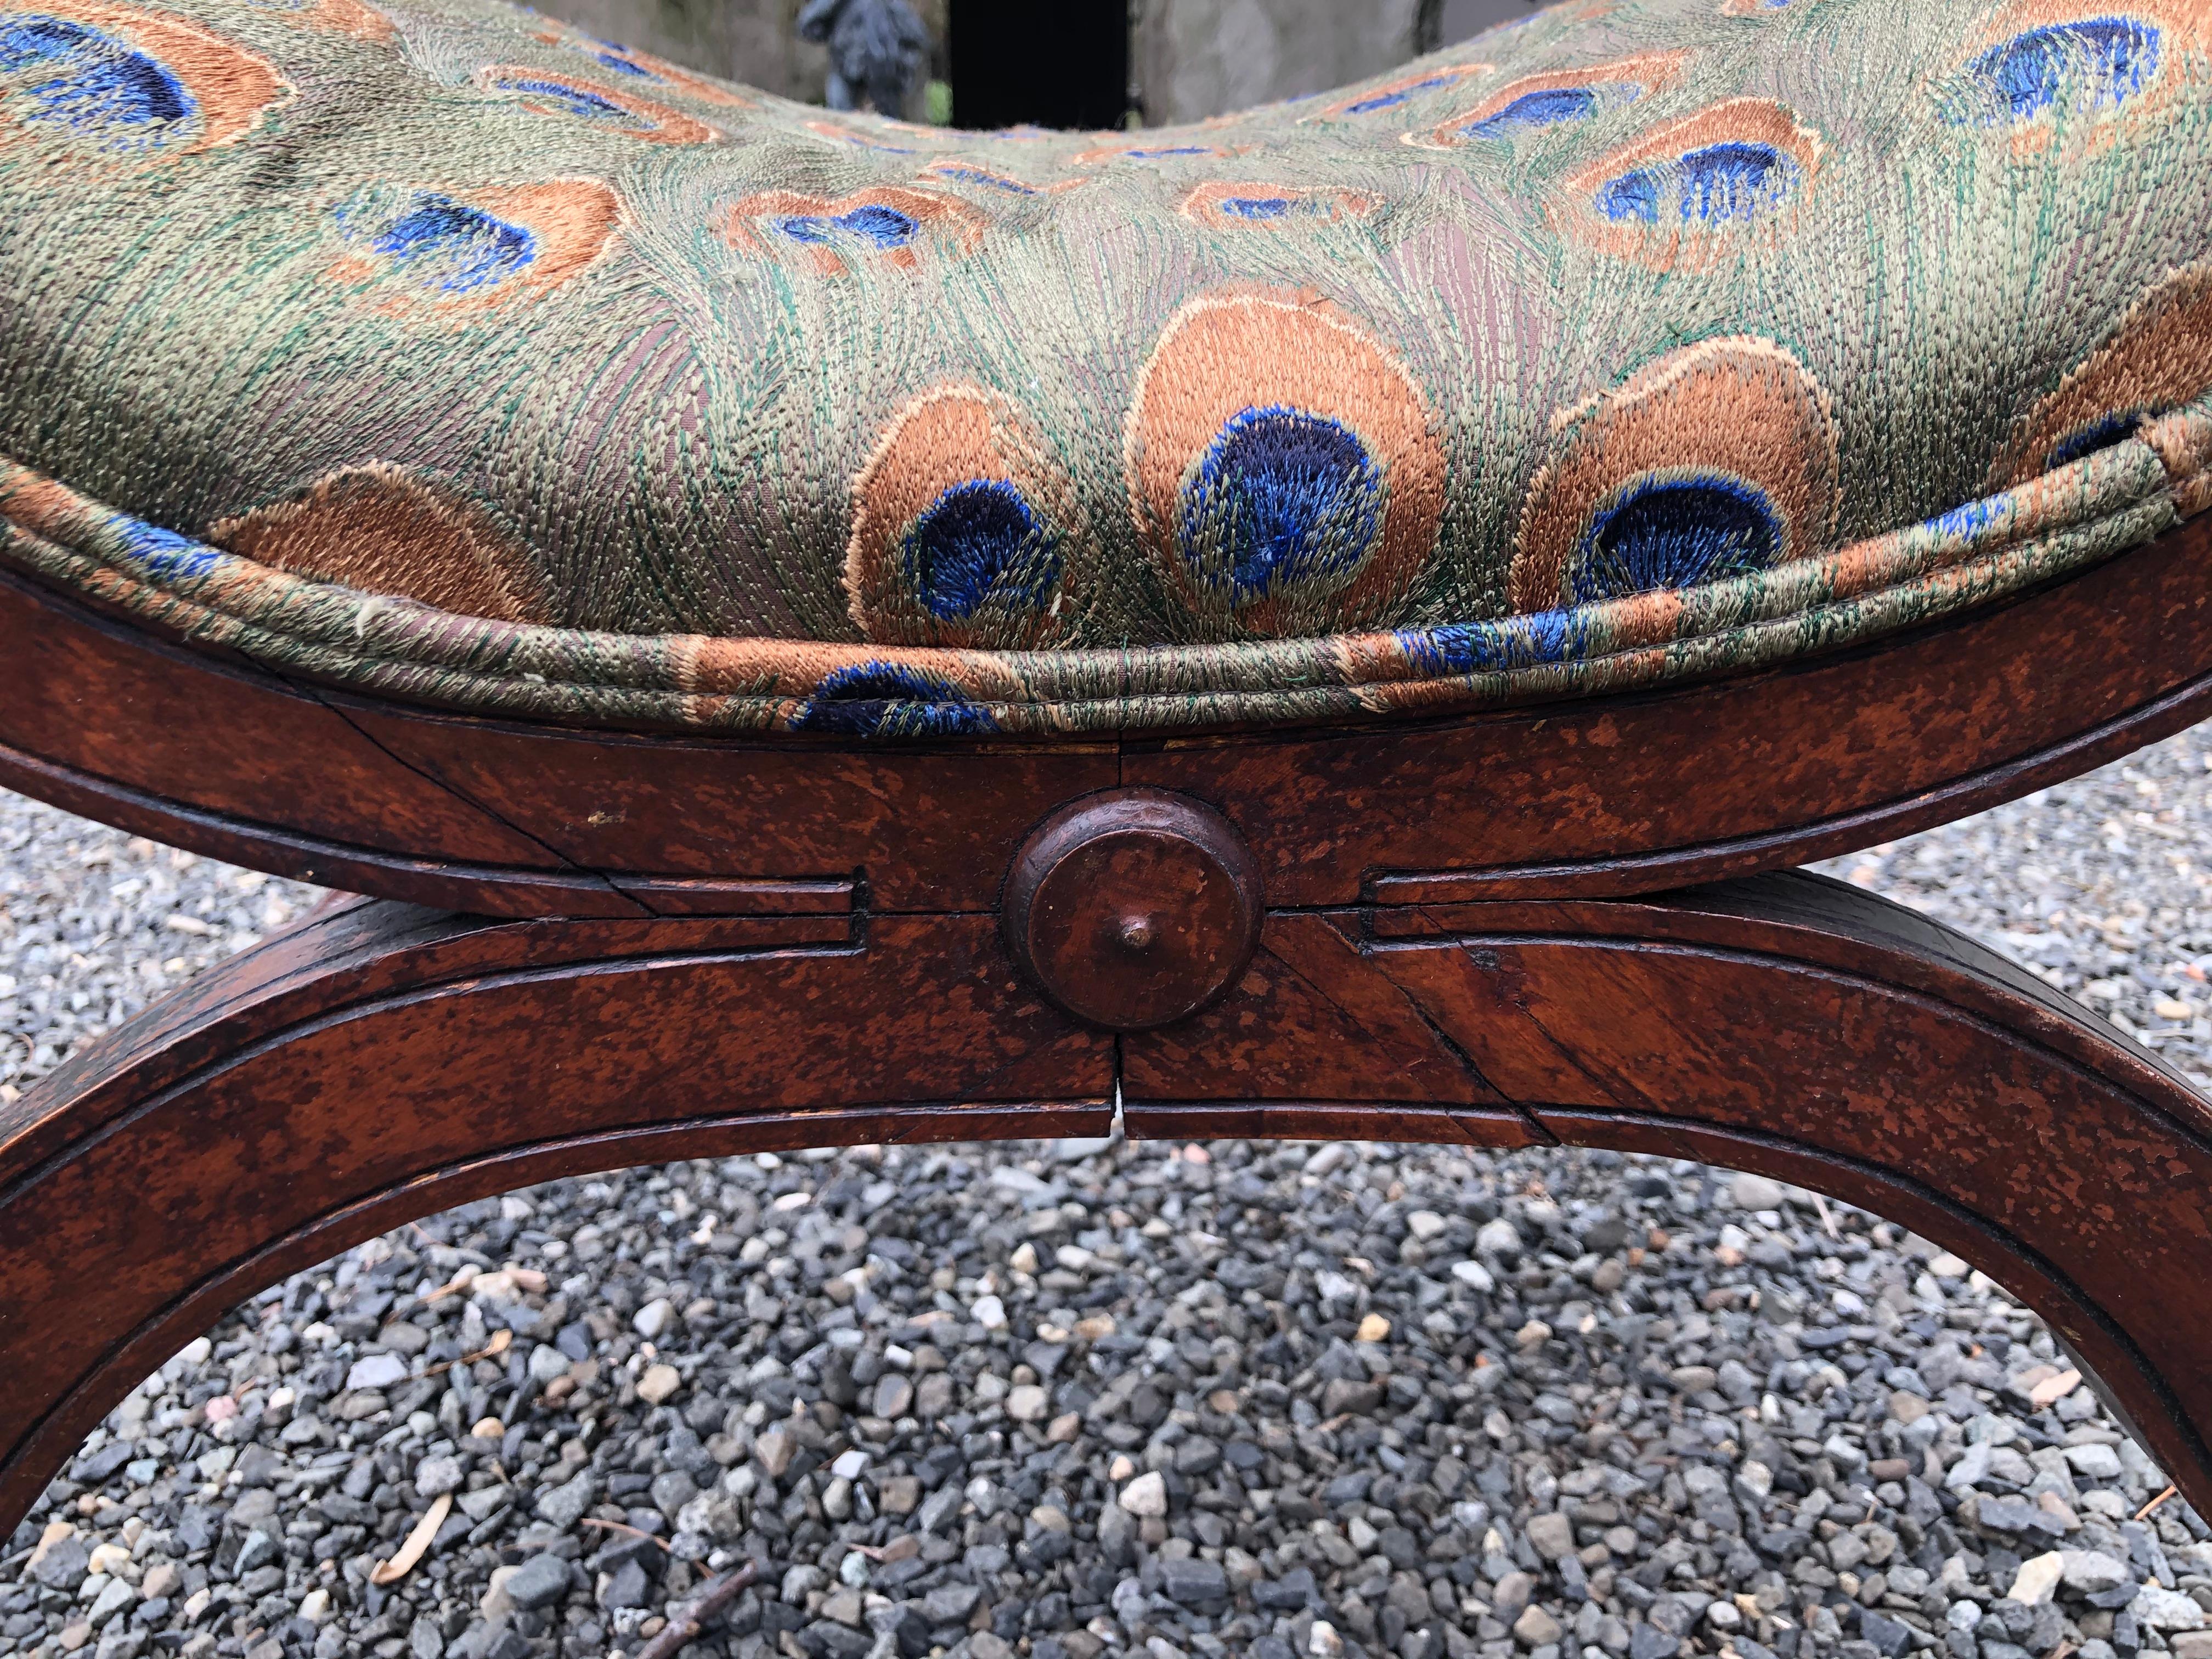 A beautiful 19th century Curule bench from Italy upholstered in a green, blue and gold peacock patterned silk having lion head finials and paw feet. The wood has great patina.